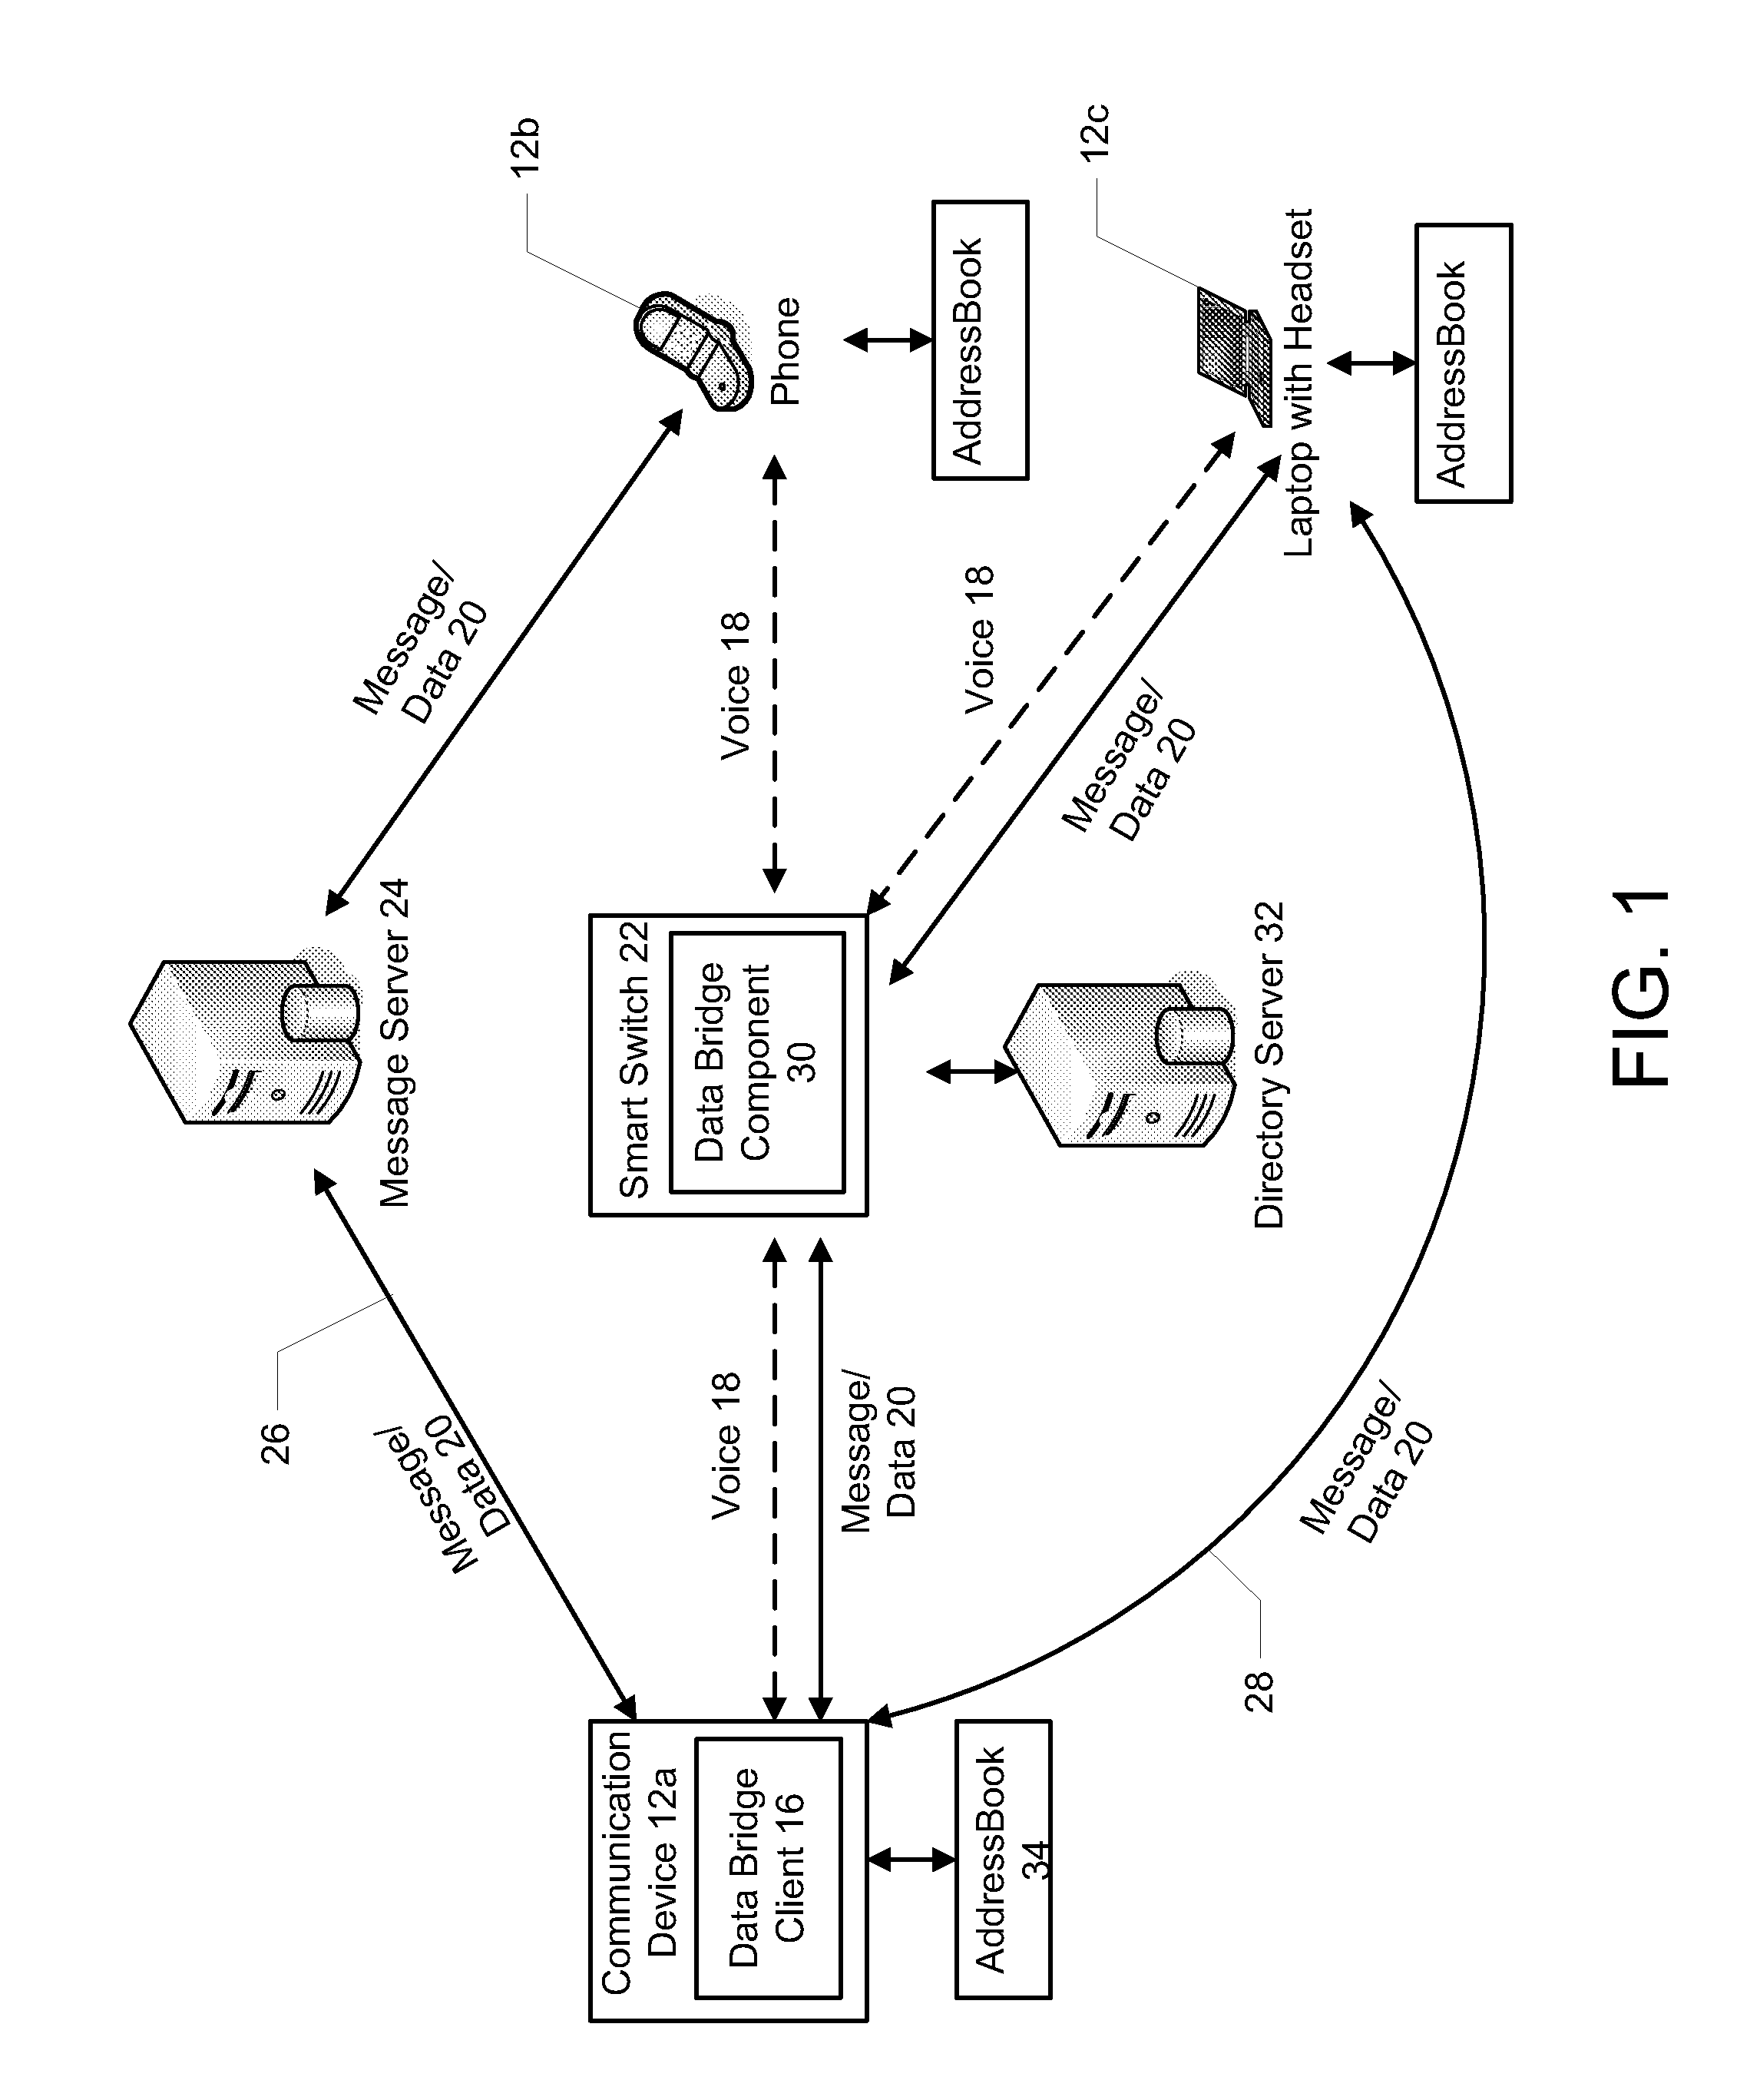 Method and apparatus for automatically sending a captured image to a phone call participant